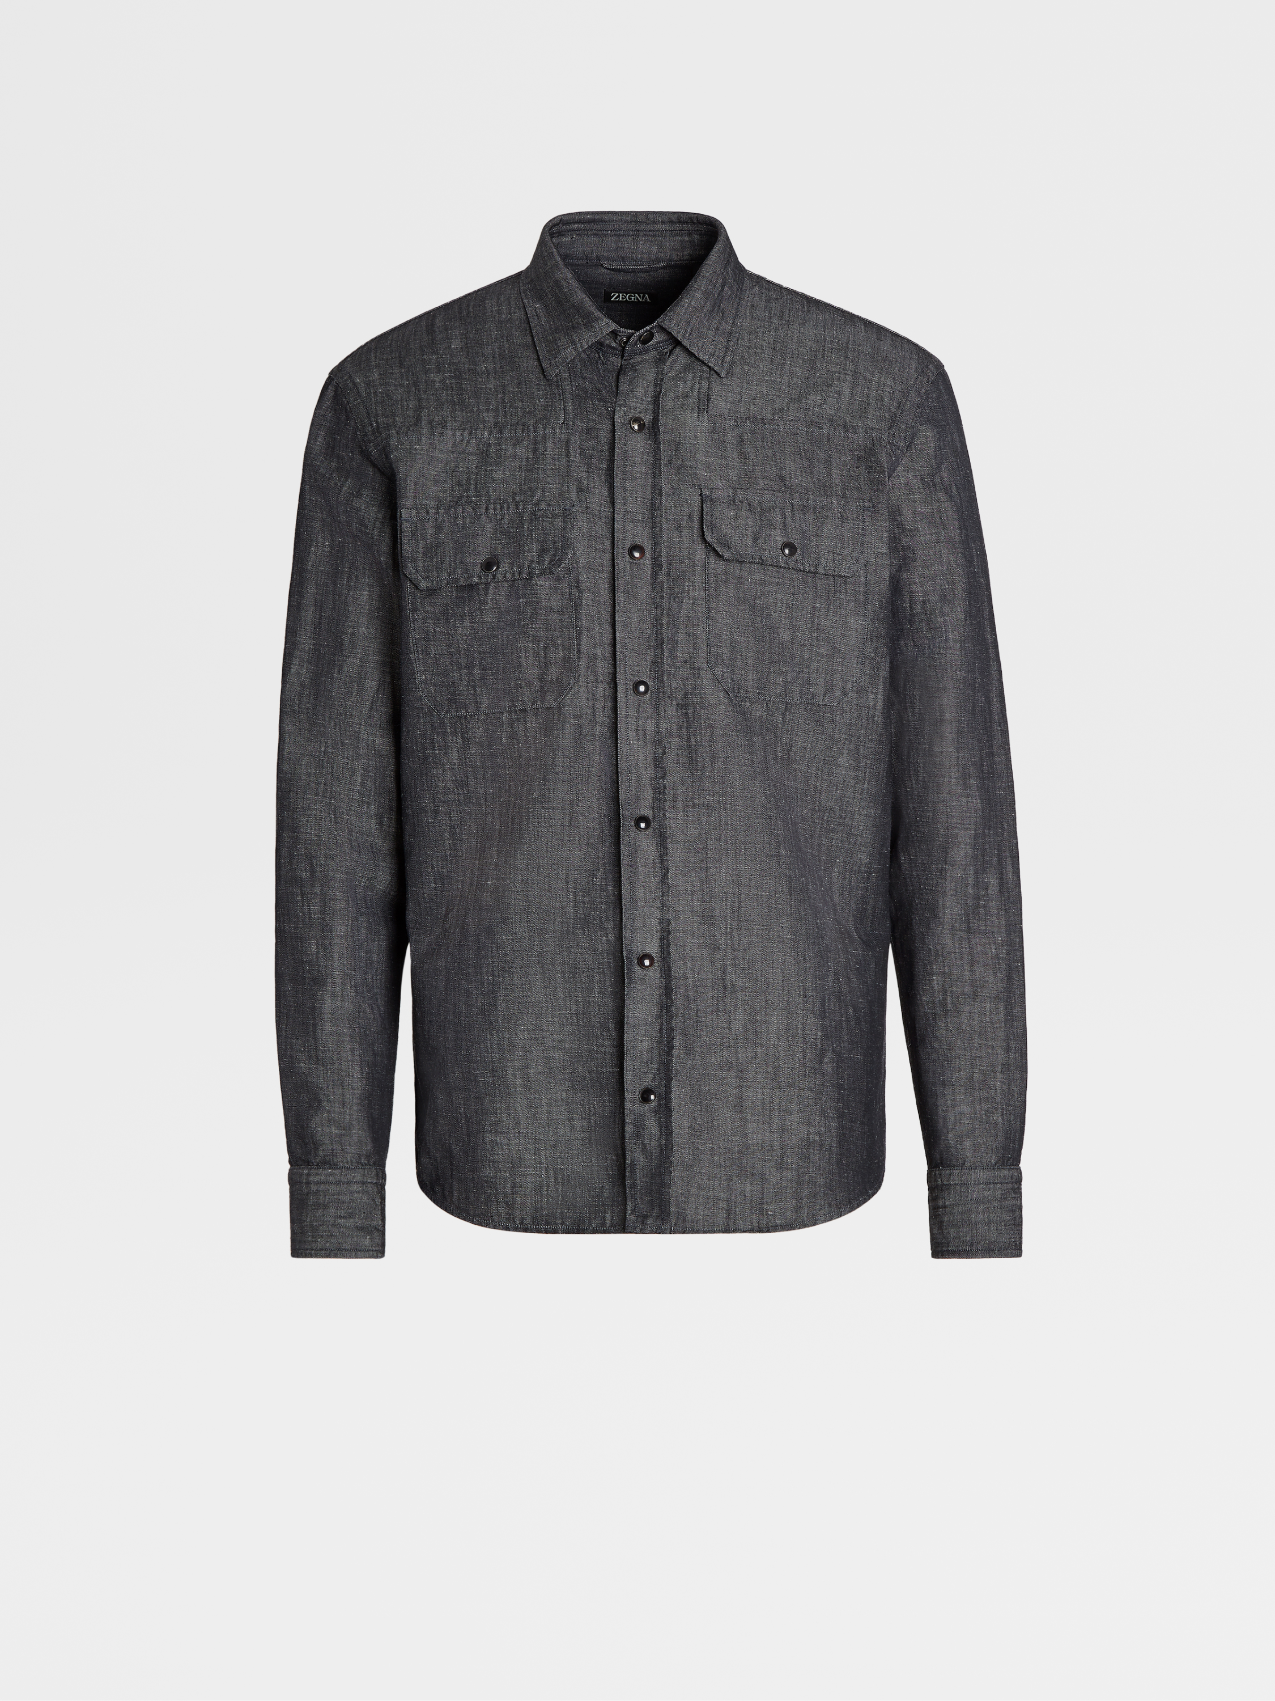 Black Cotton and Linen Rinse Washed Denim Long-sleeve Shirt